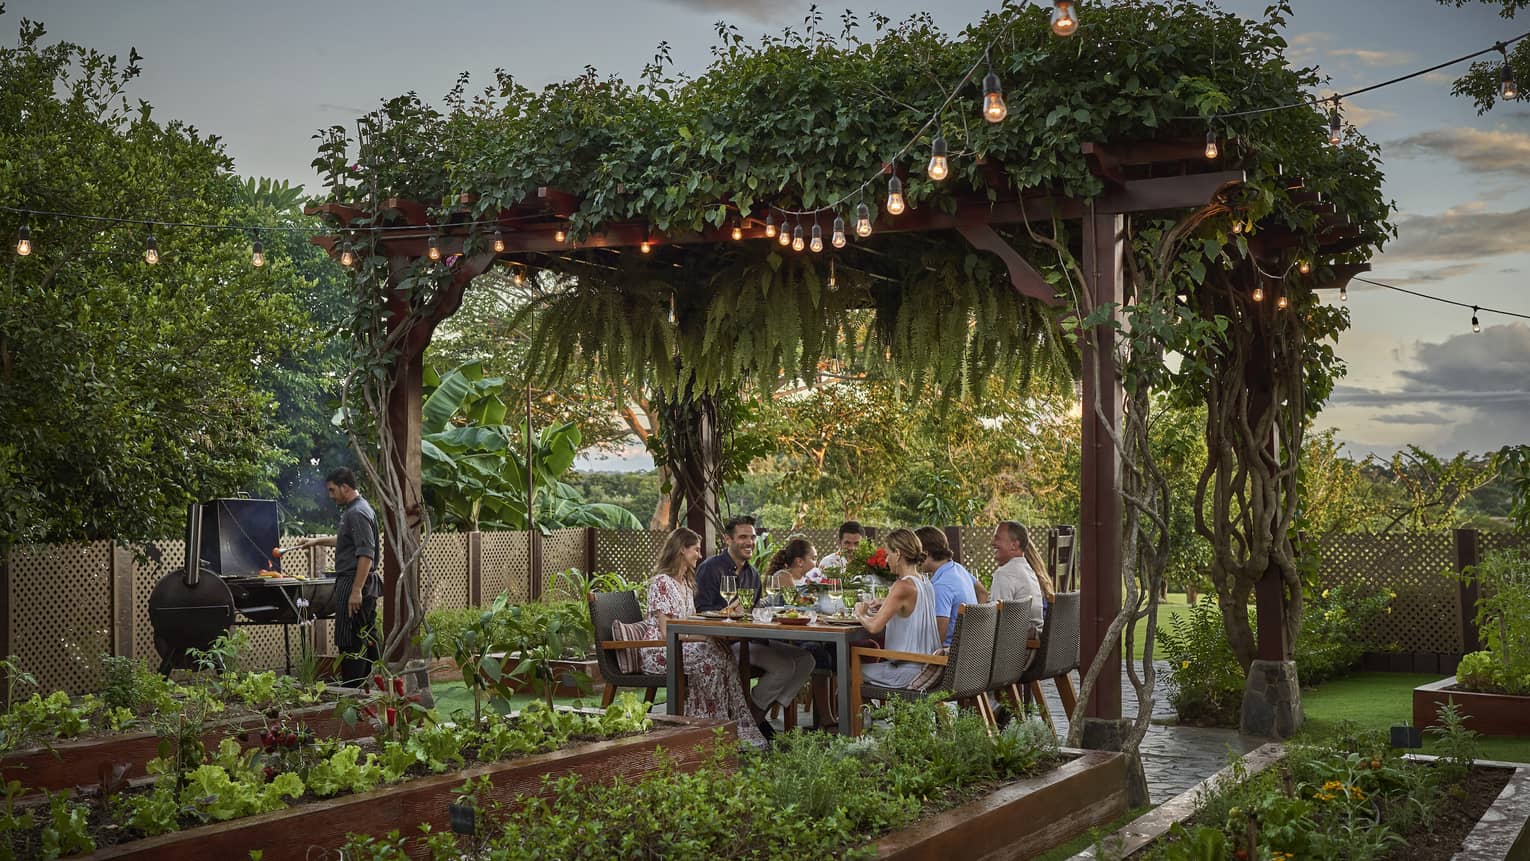 A group sits at a dinner table set underneath a pergola topped with greenery and surrounded by garden boxes